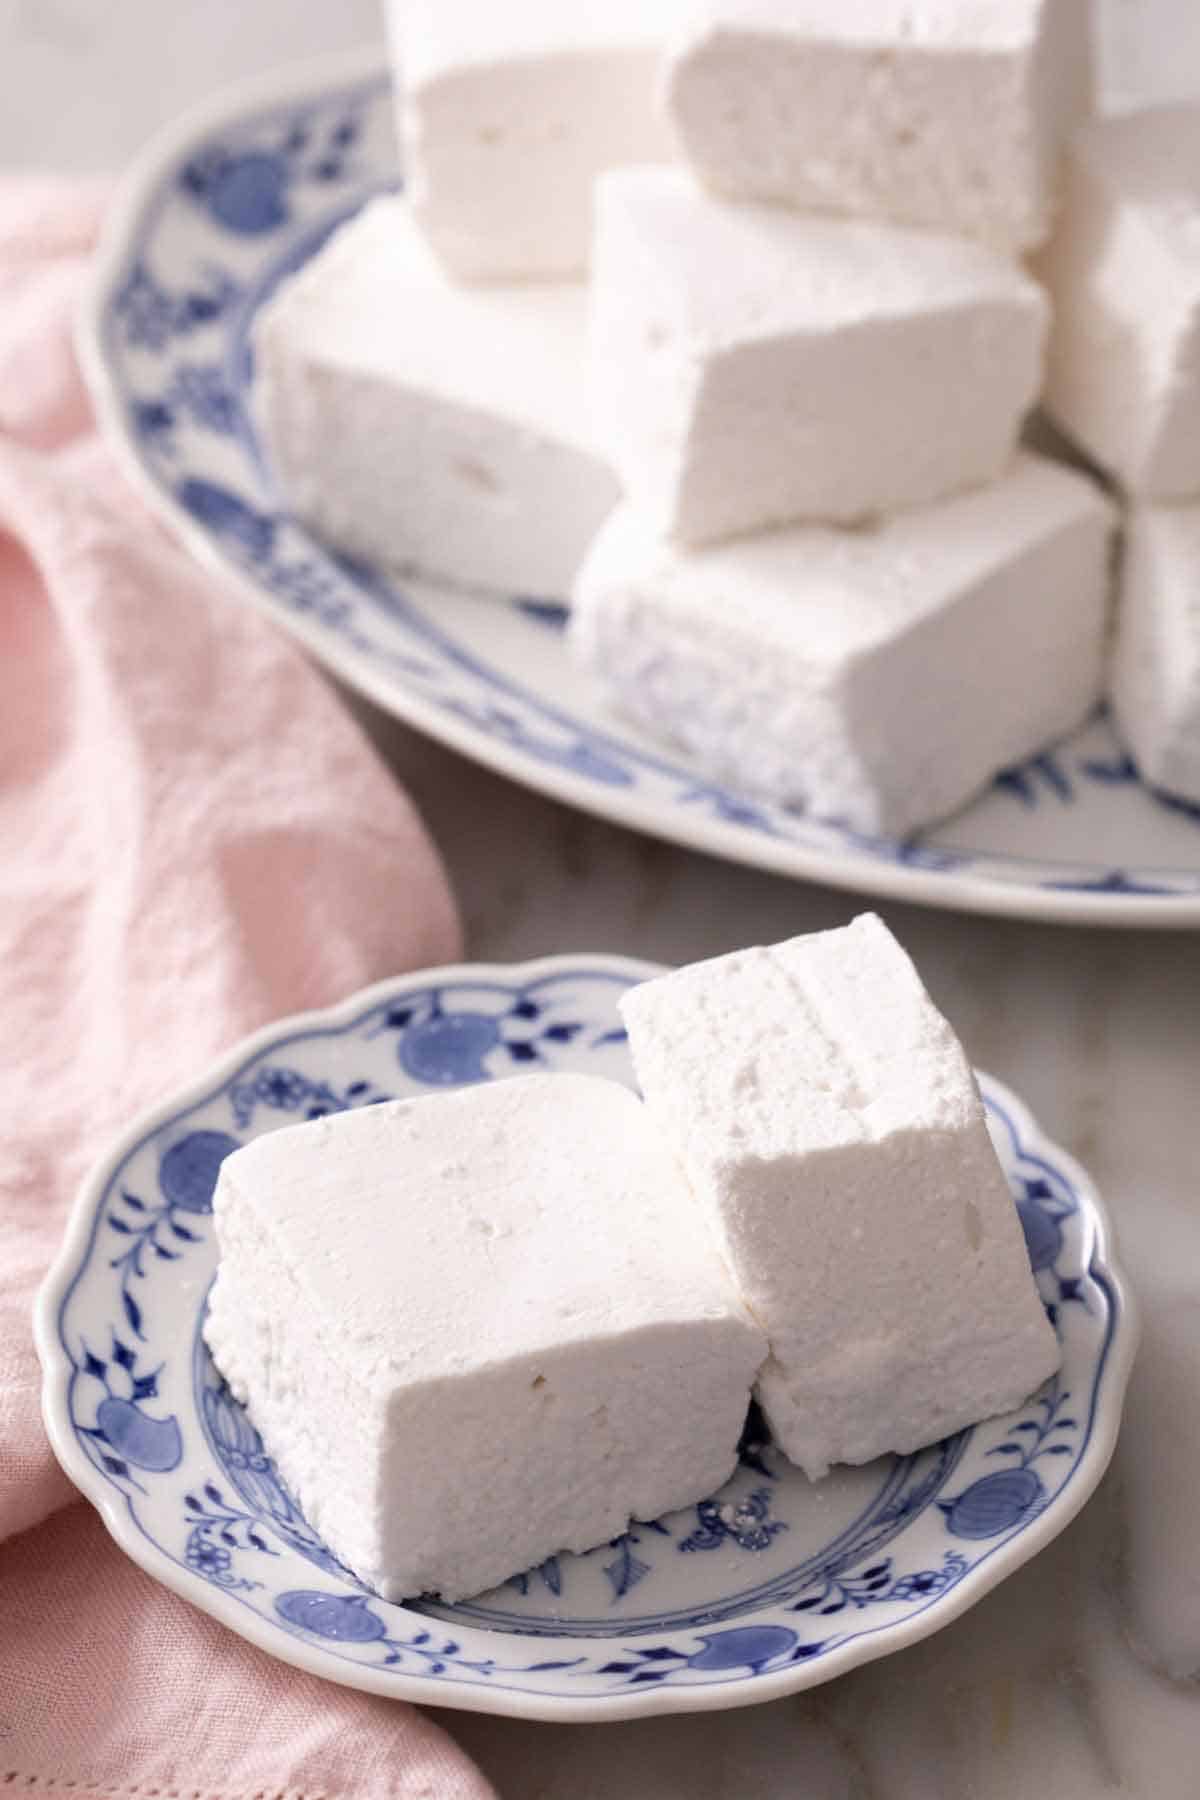 A plate with two homemade marshmallows with a platter in the background.